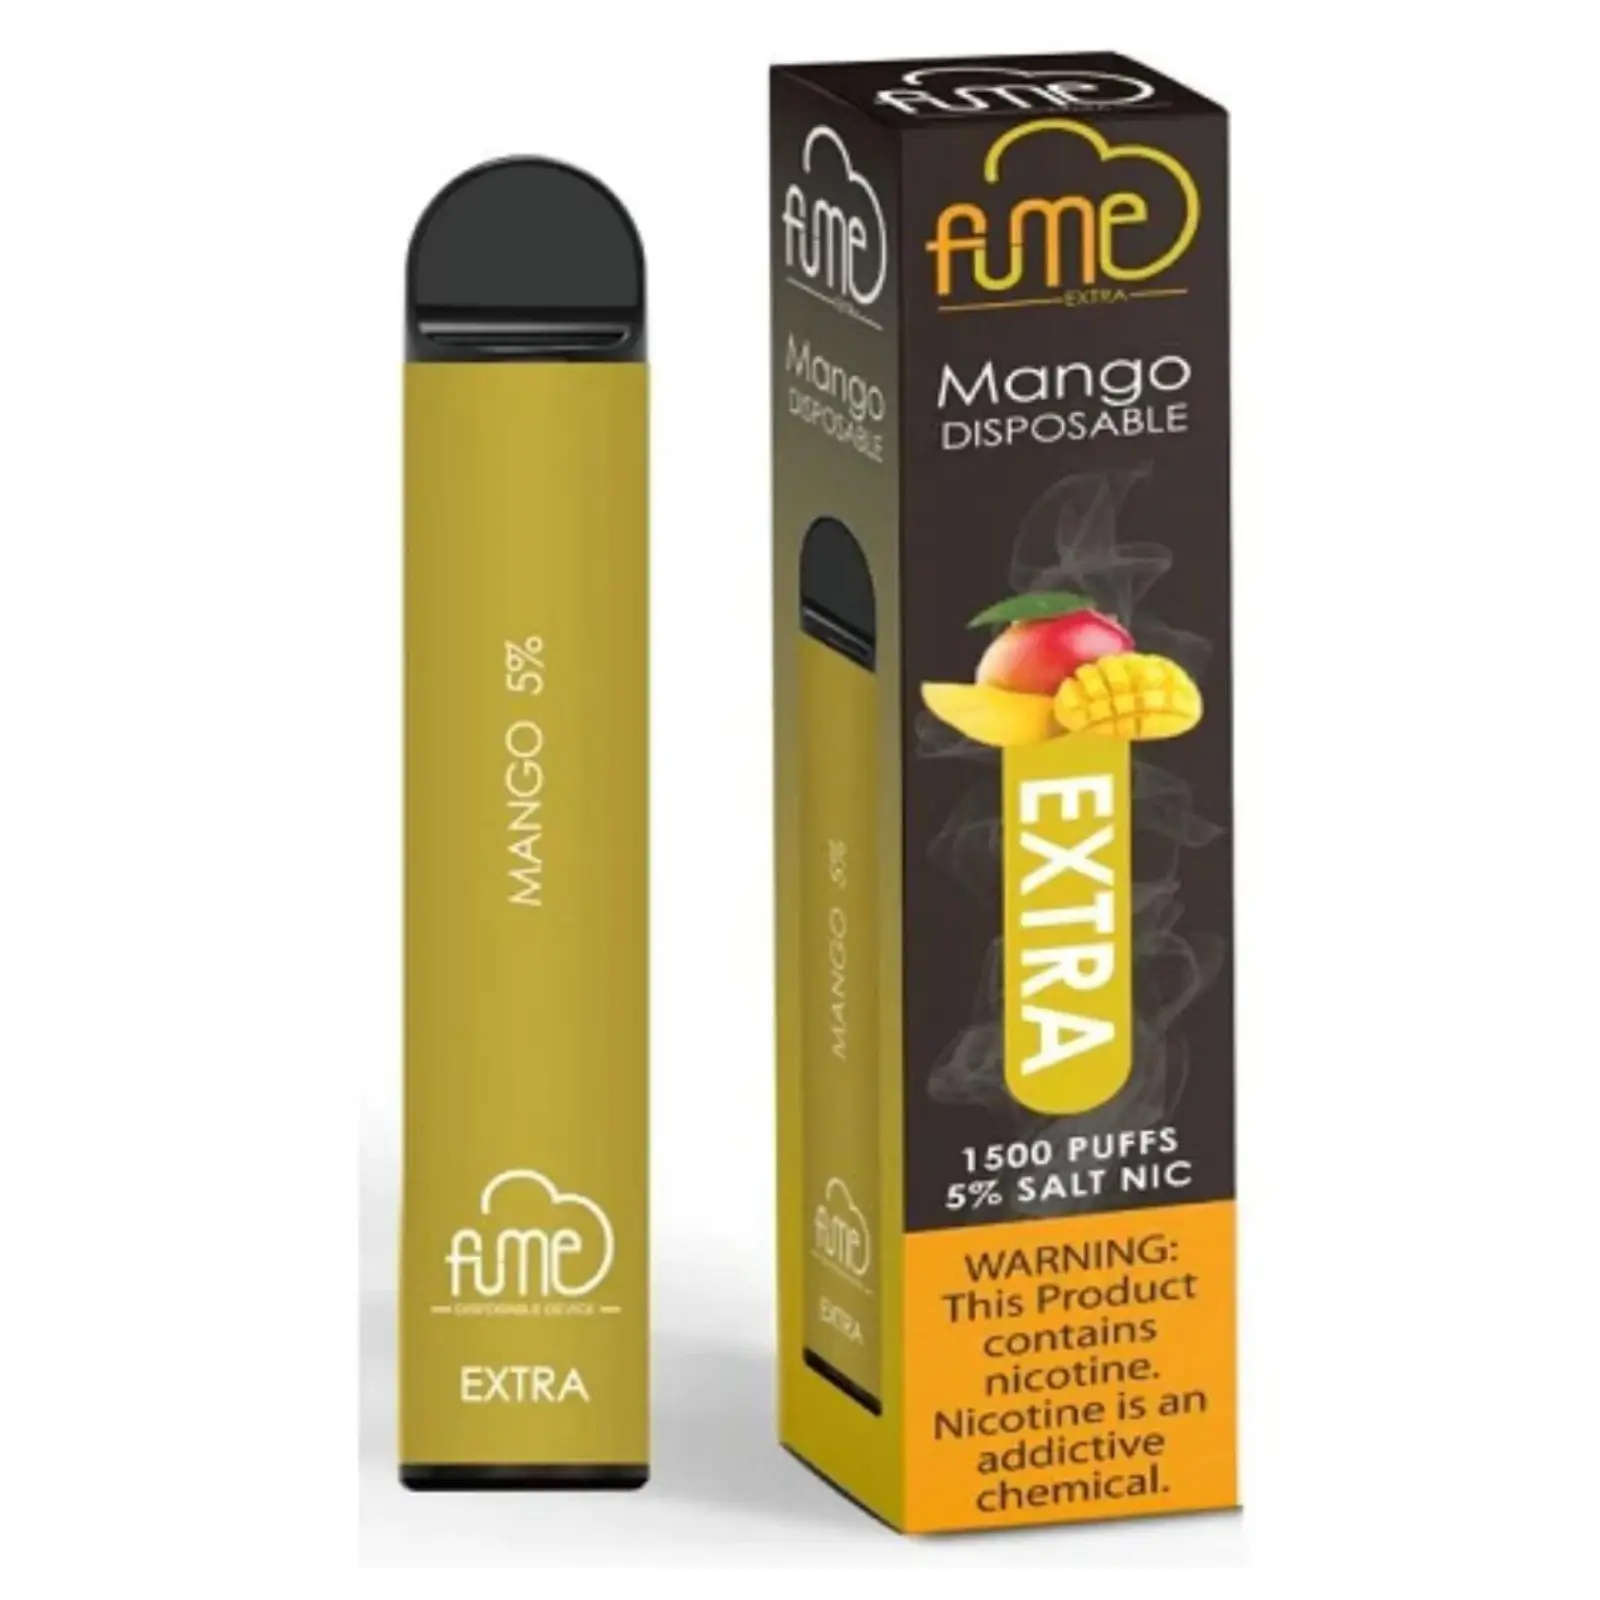 Mango Bliss: Unveiling the Fume Extra 1500 Puffs Device